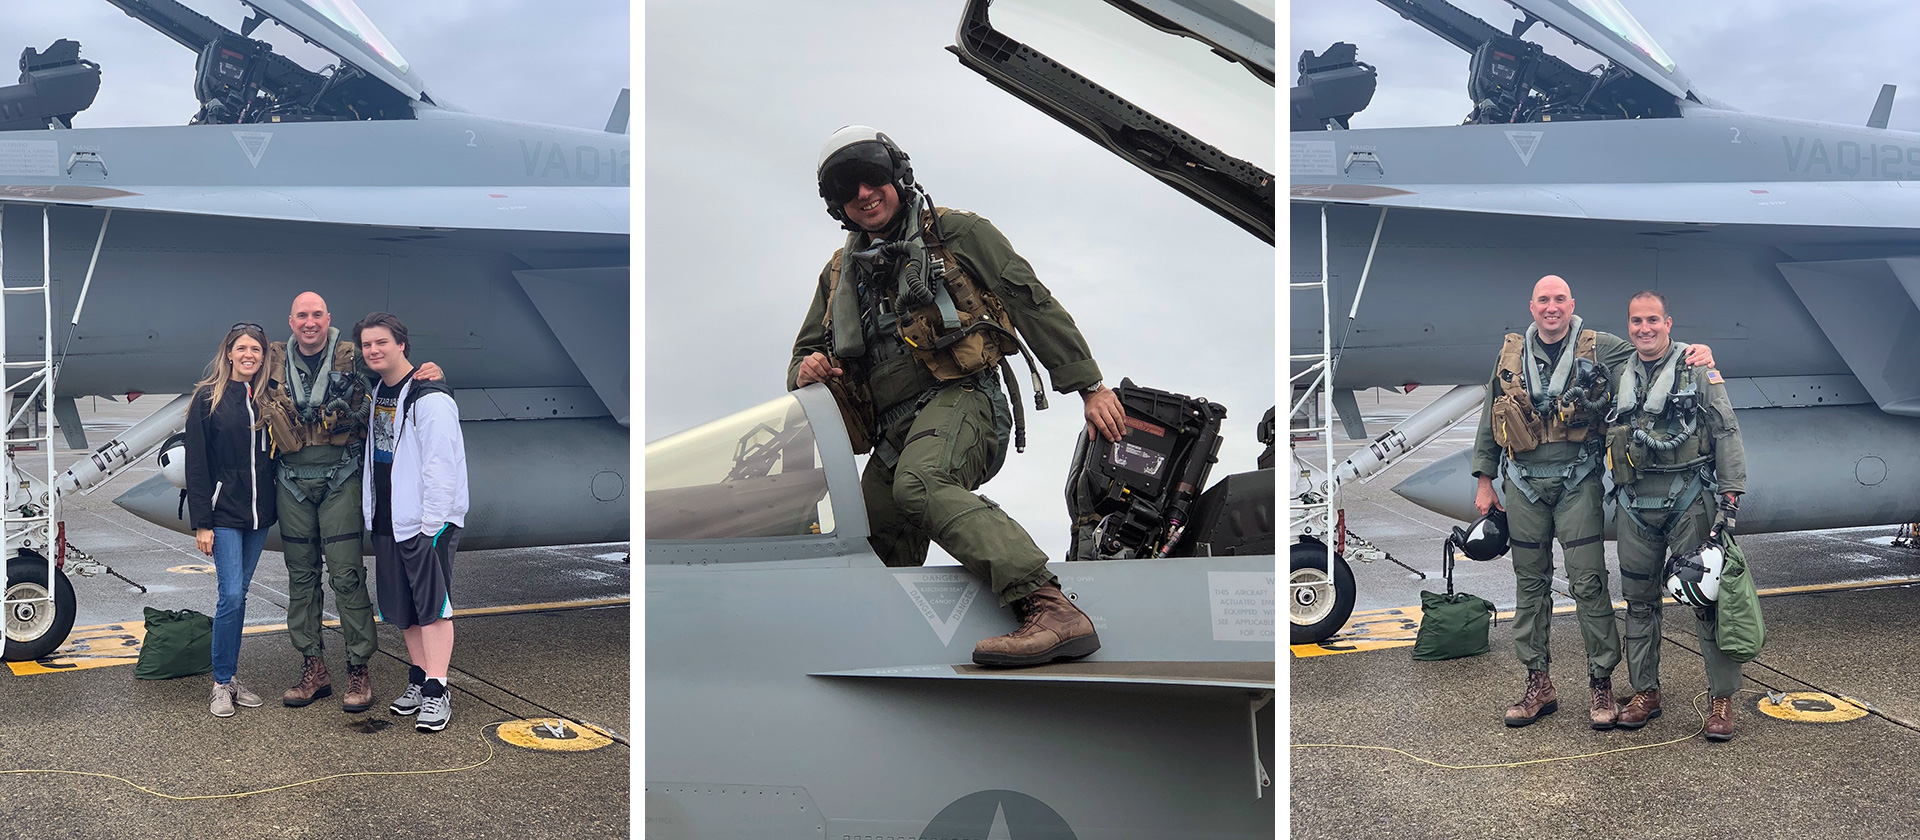 Three photos of David Picinich with family and colleague. All photos are outdoors, taken in front of an EA-18G Growler.